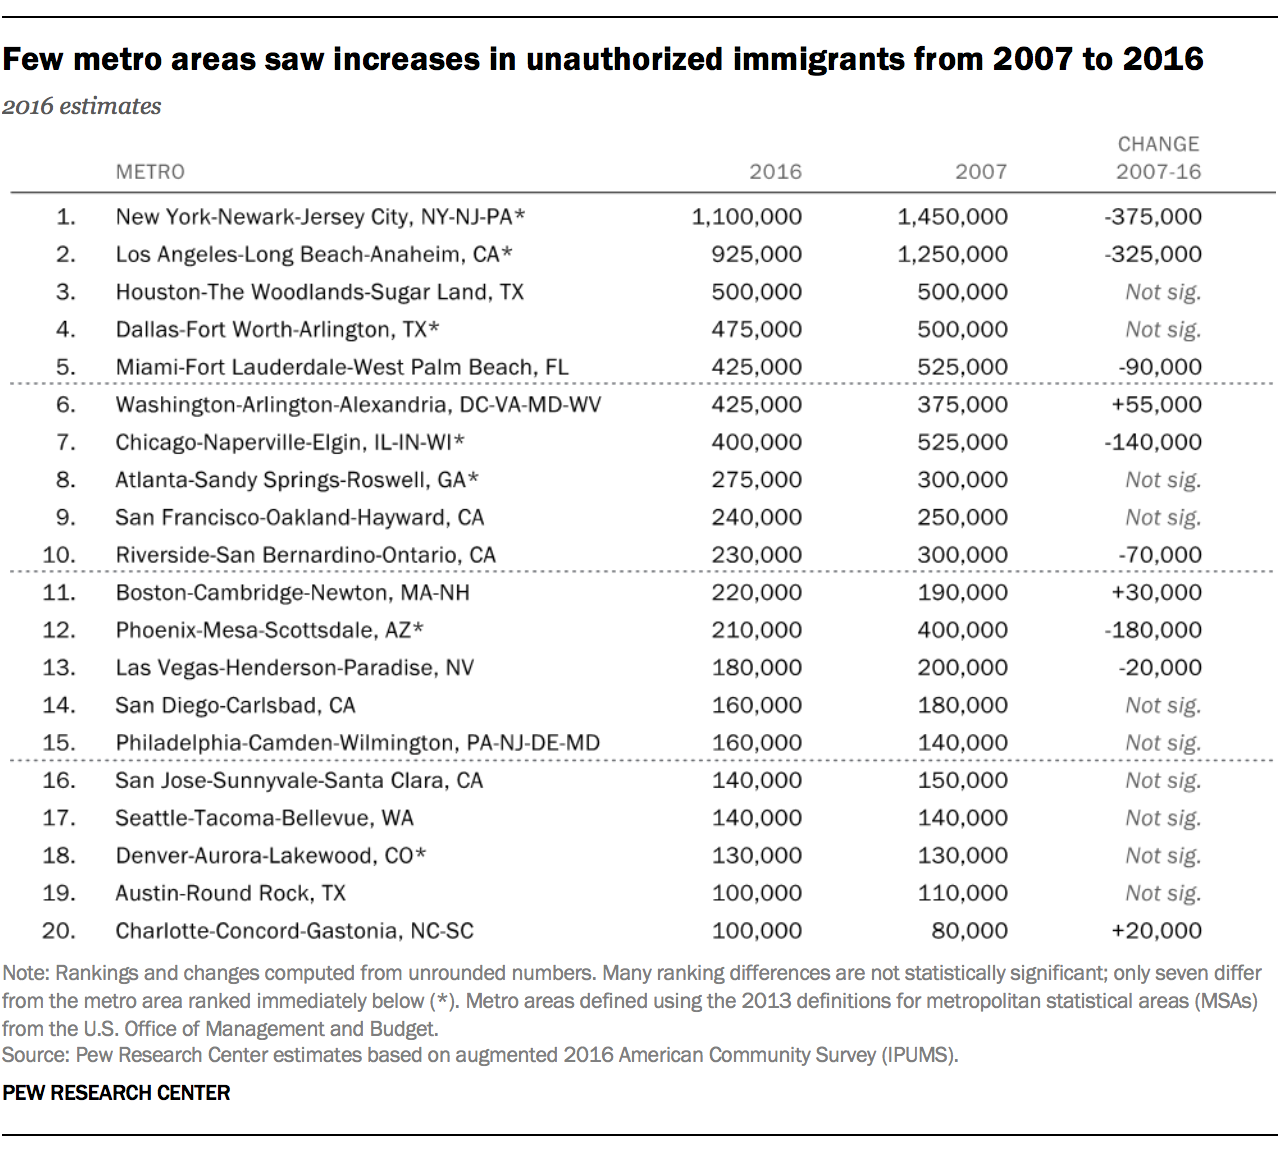 Few metro areas saw increases in unauthorized immigrants from 2007 to 2016